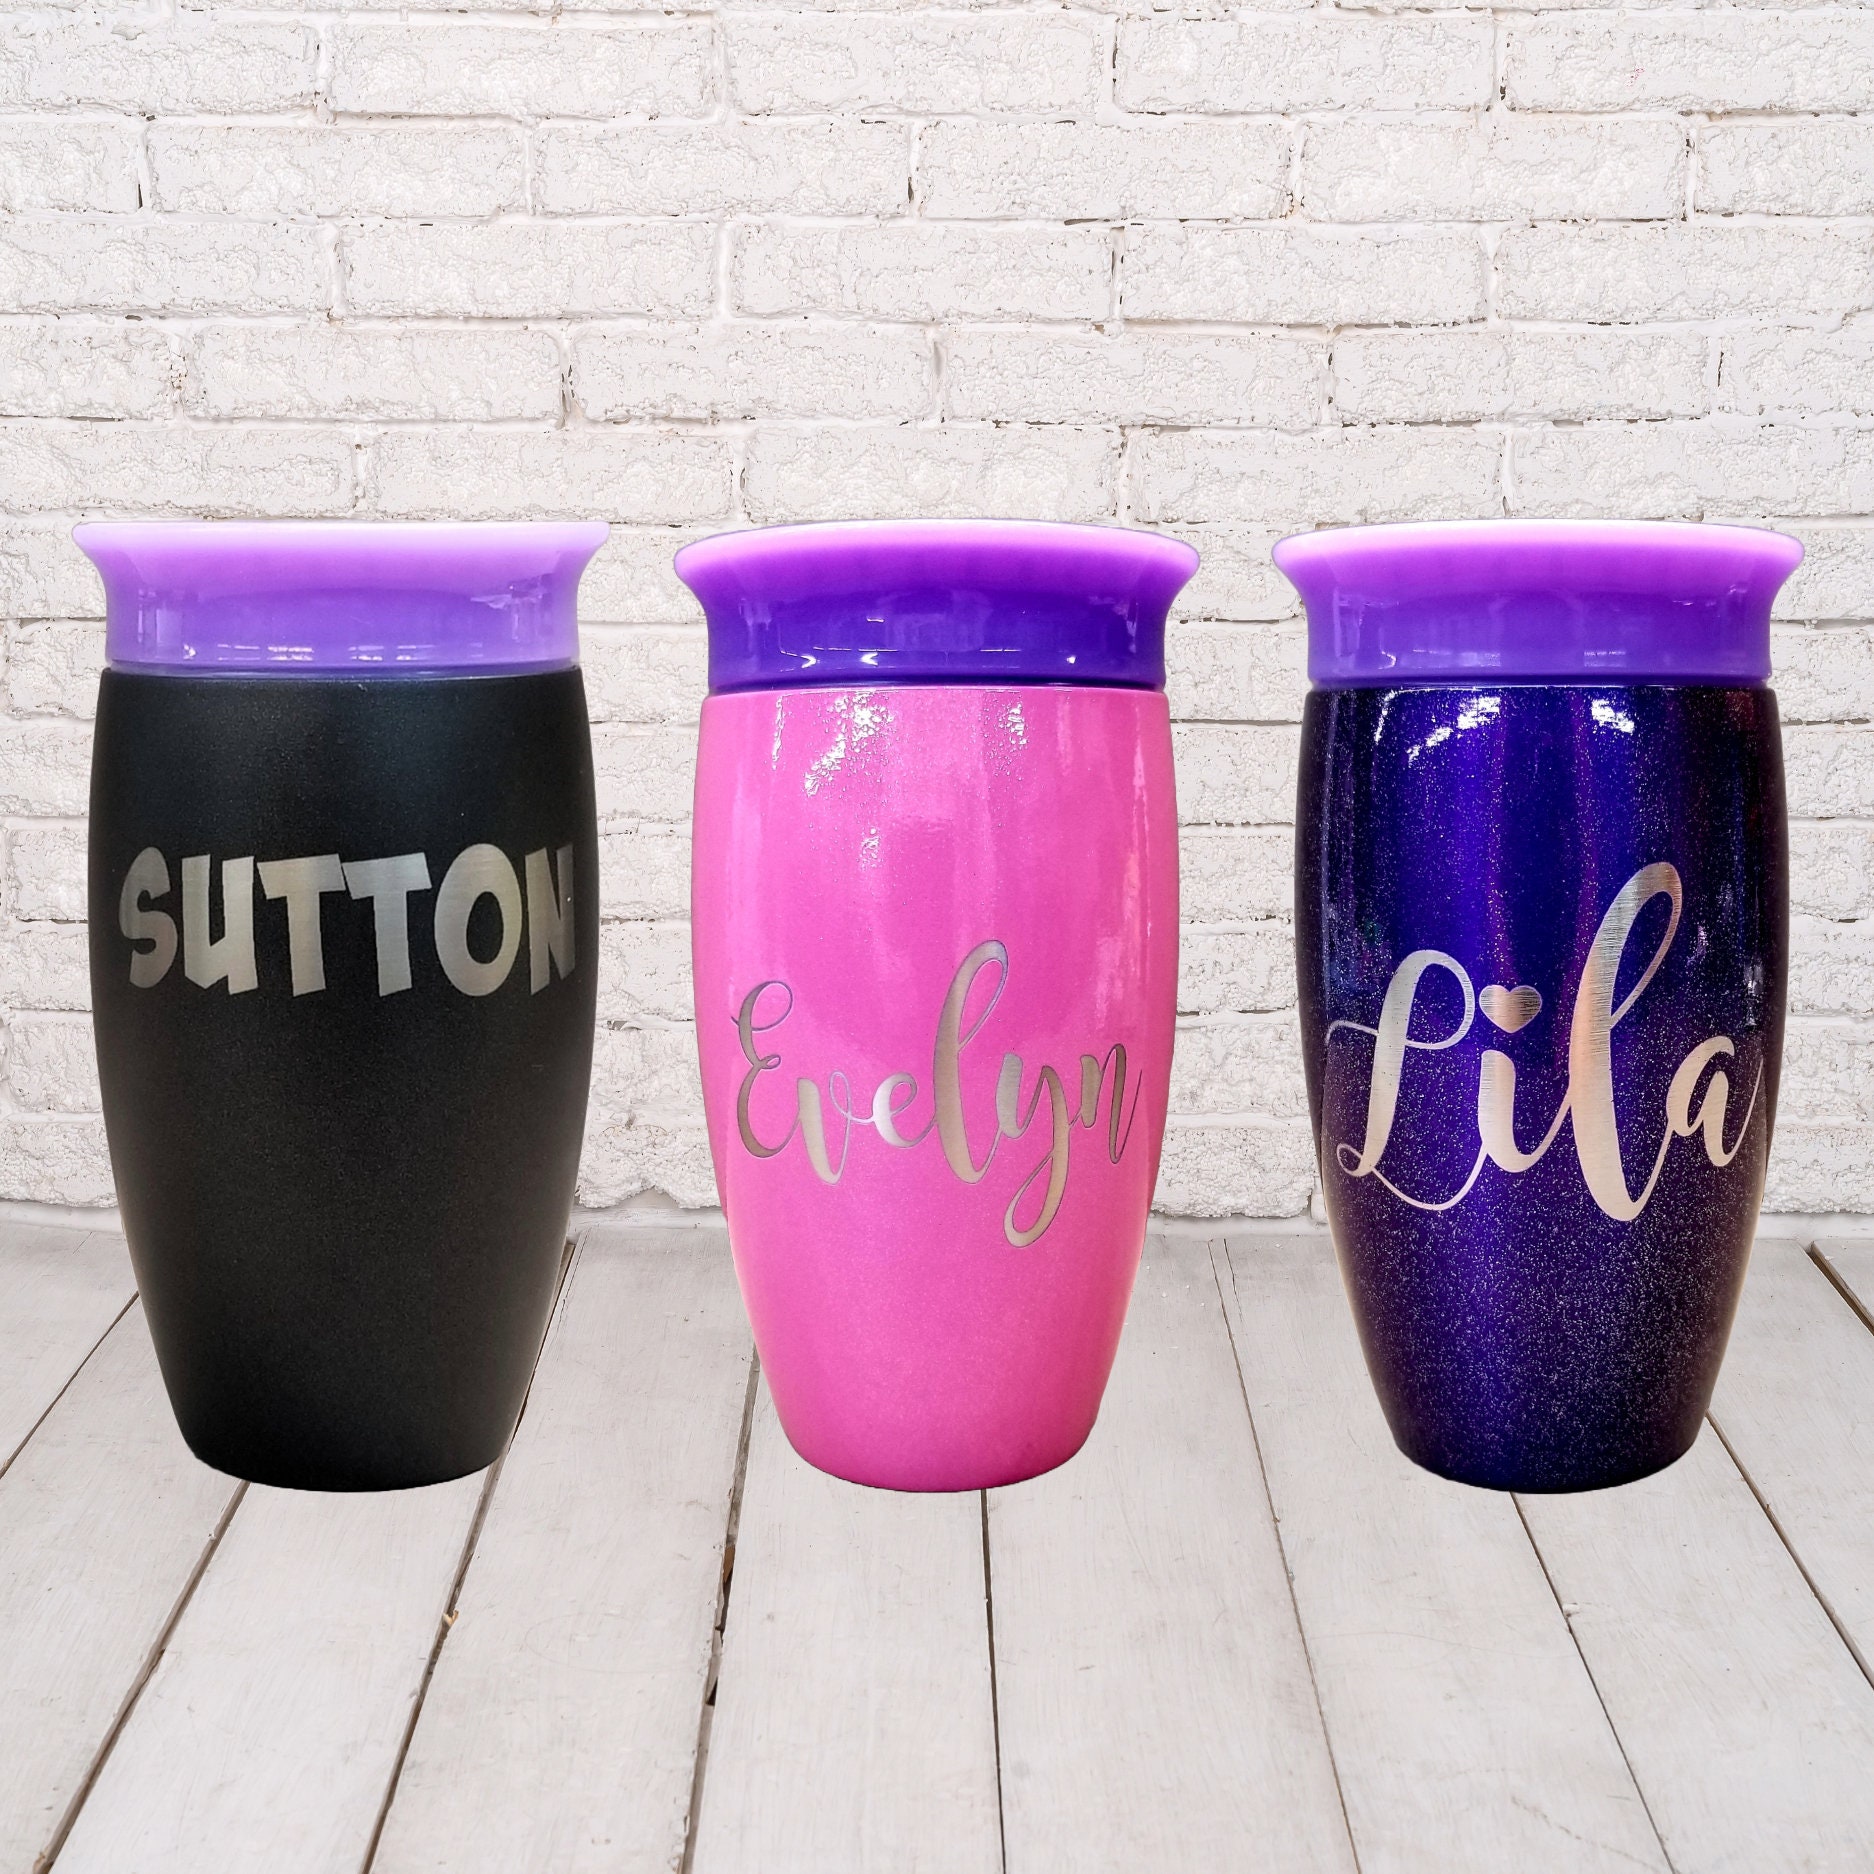 Customized Sippy Cups for Boys - 4 Designs